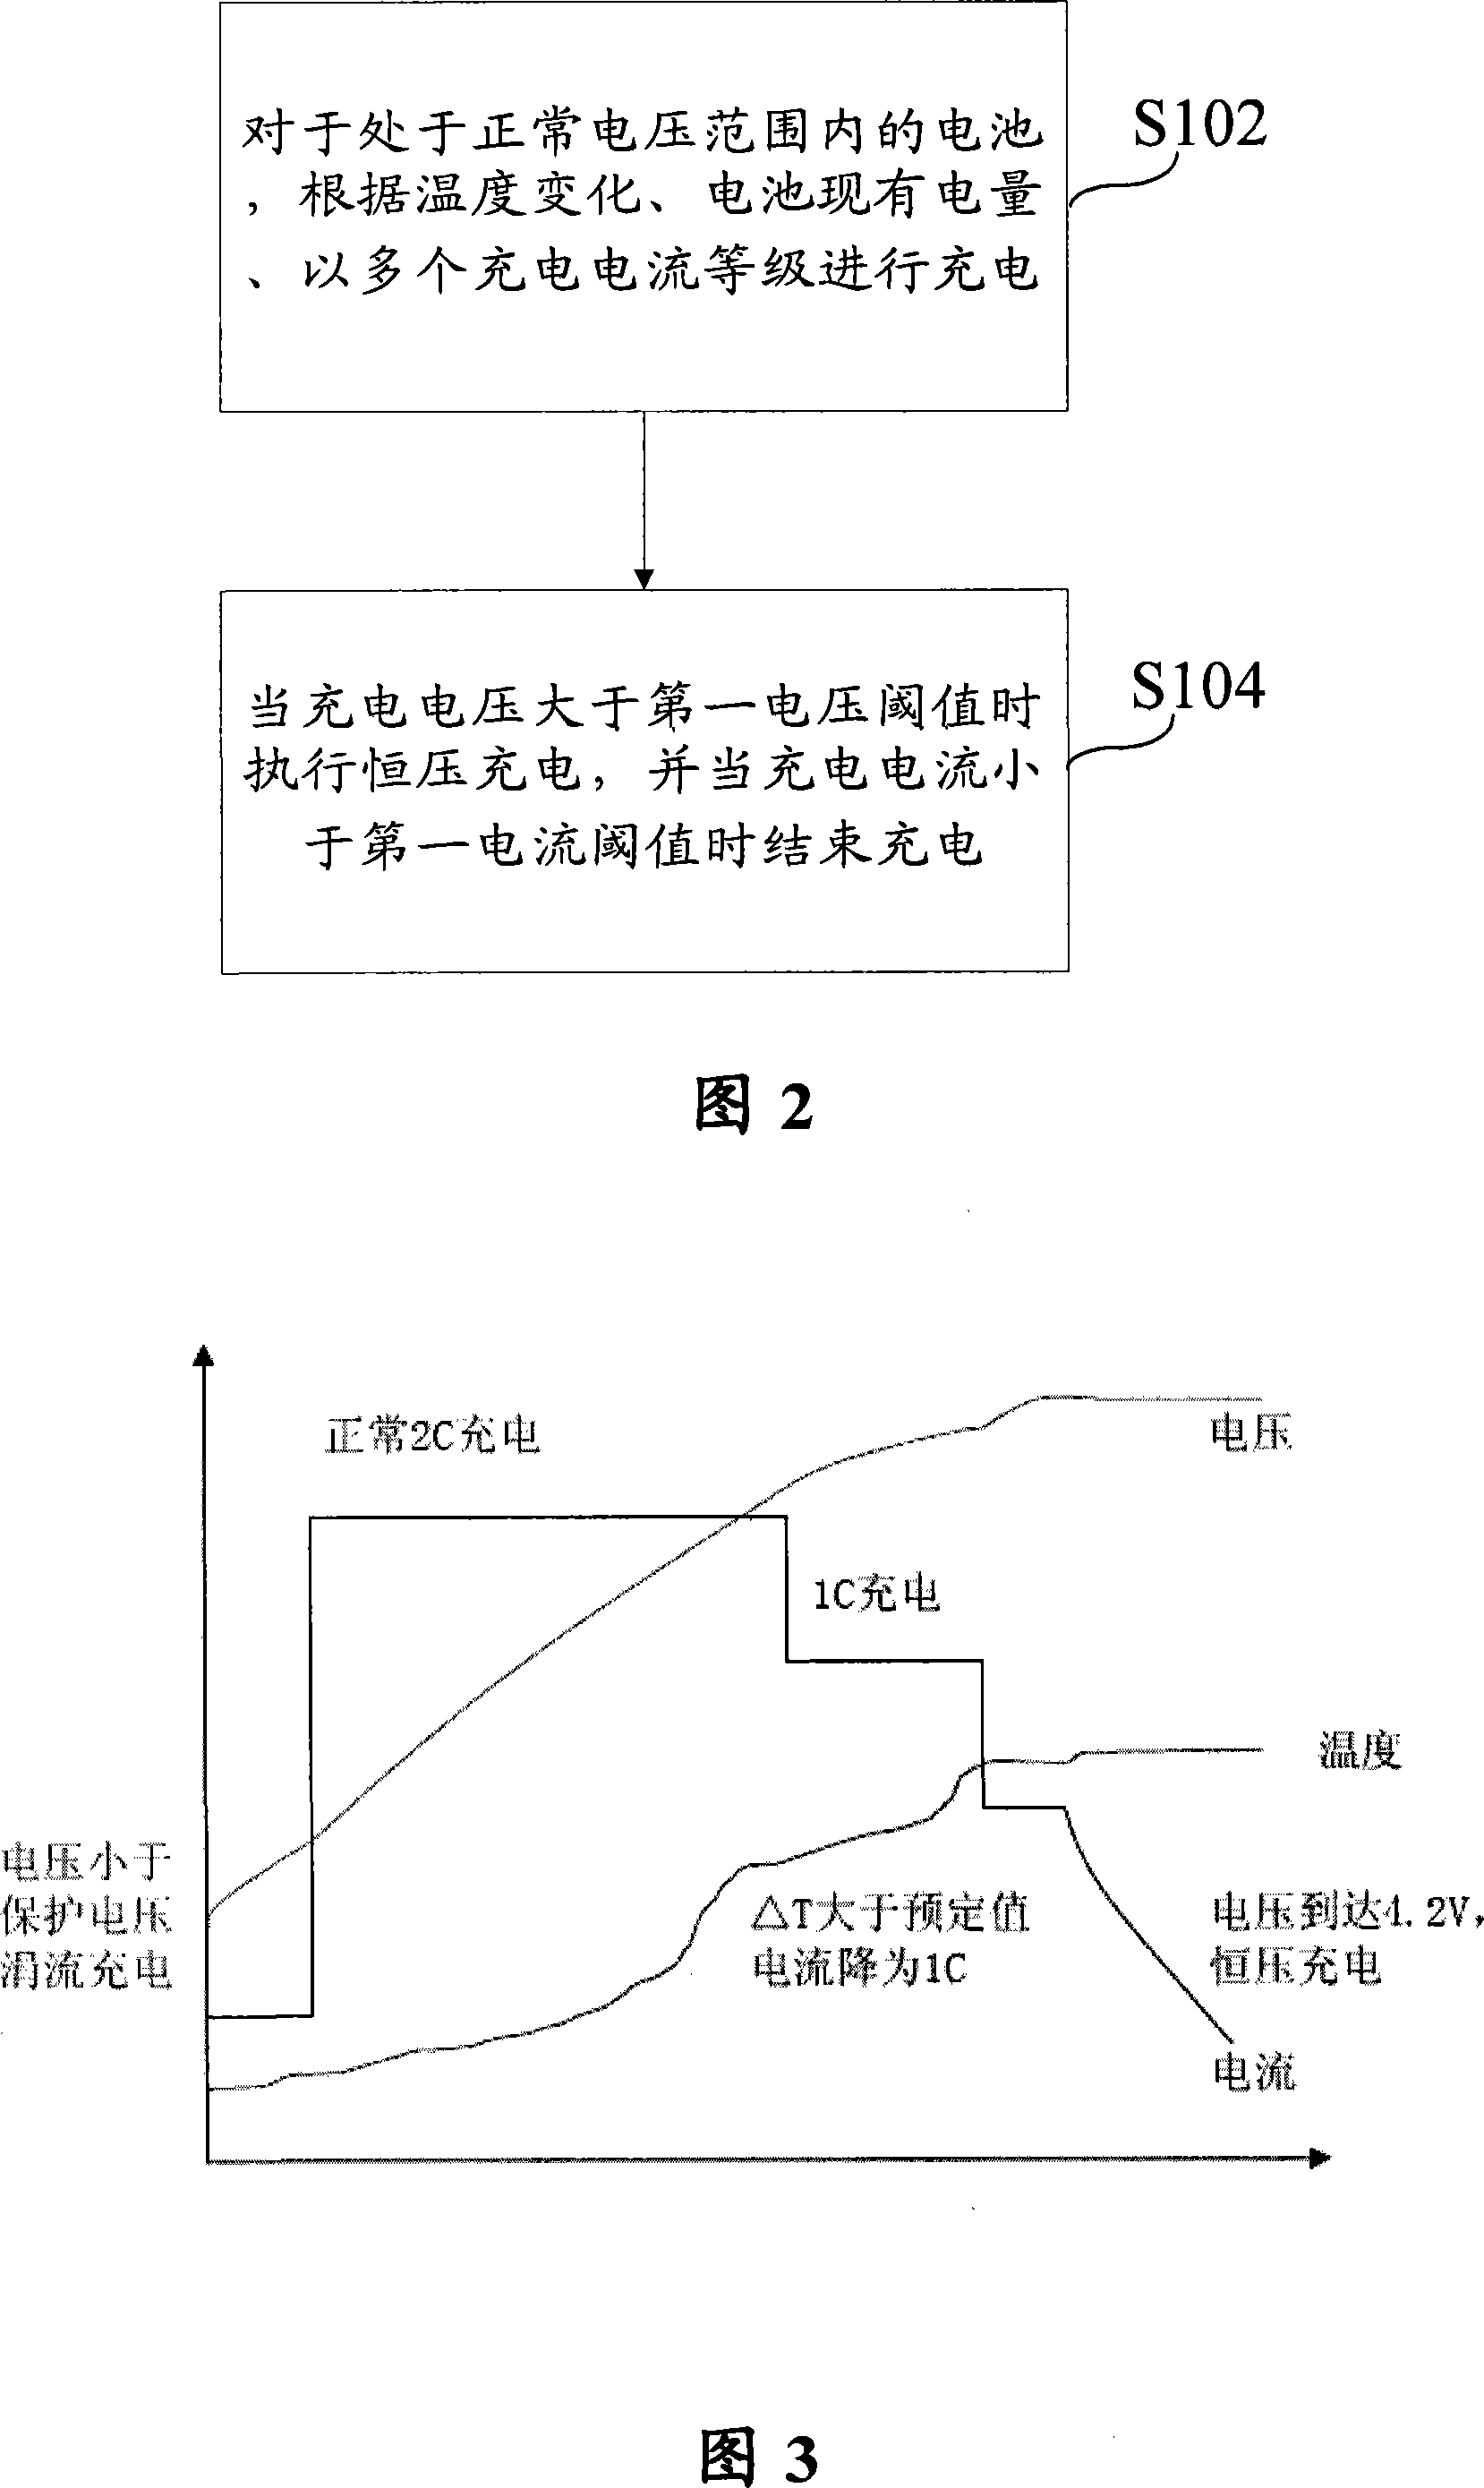 Method for charging battery of portable handheld device